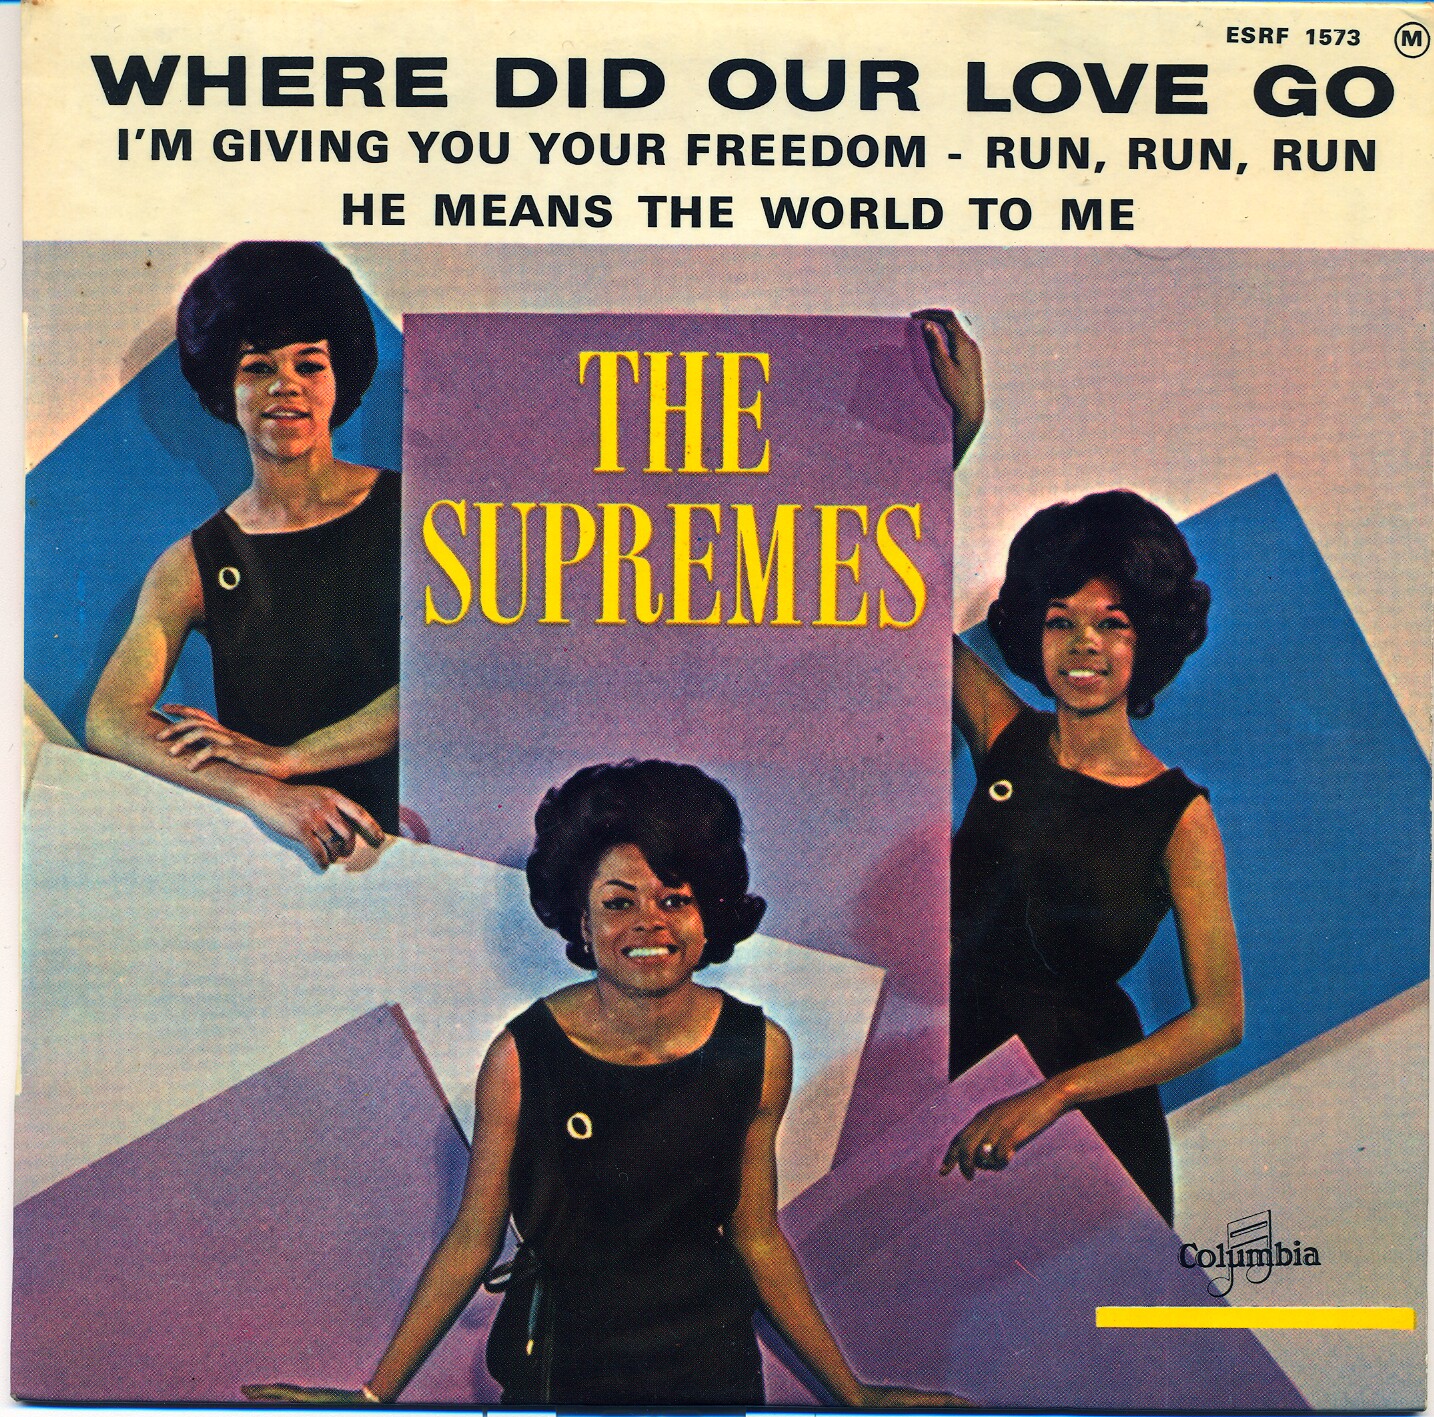 To the love goes out. Группа the Supremes. Diana Ross & the Supremes Baby Love обложка. Обложка альбома the Supremes a go go 1966. The Supremes where did our Love go.